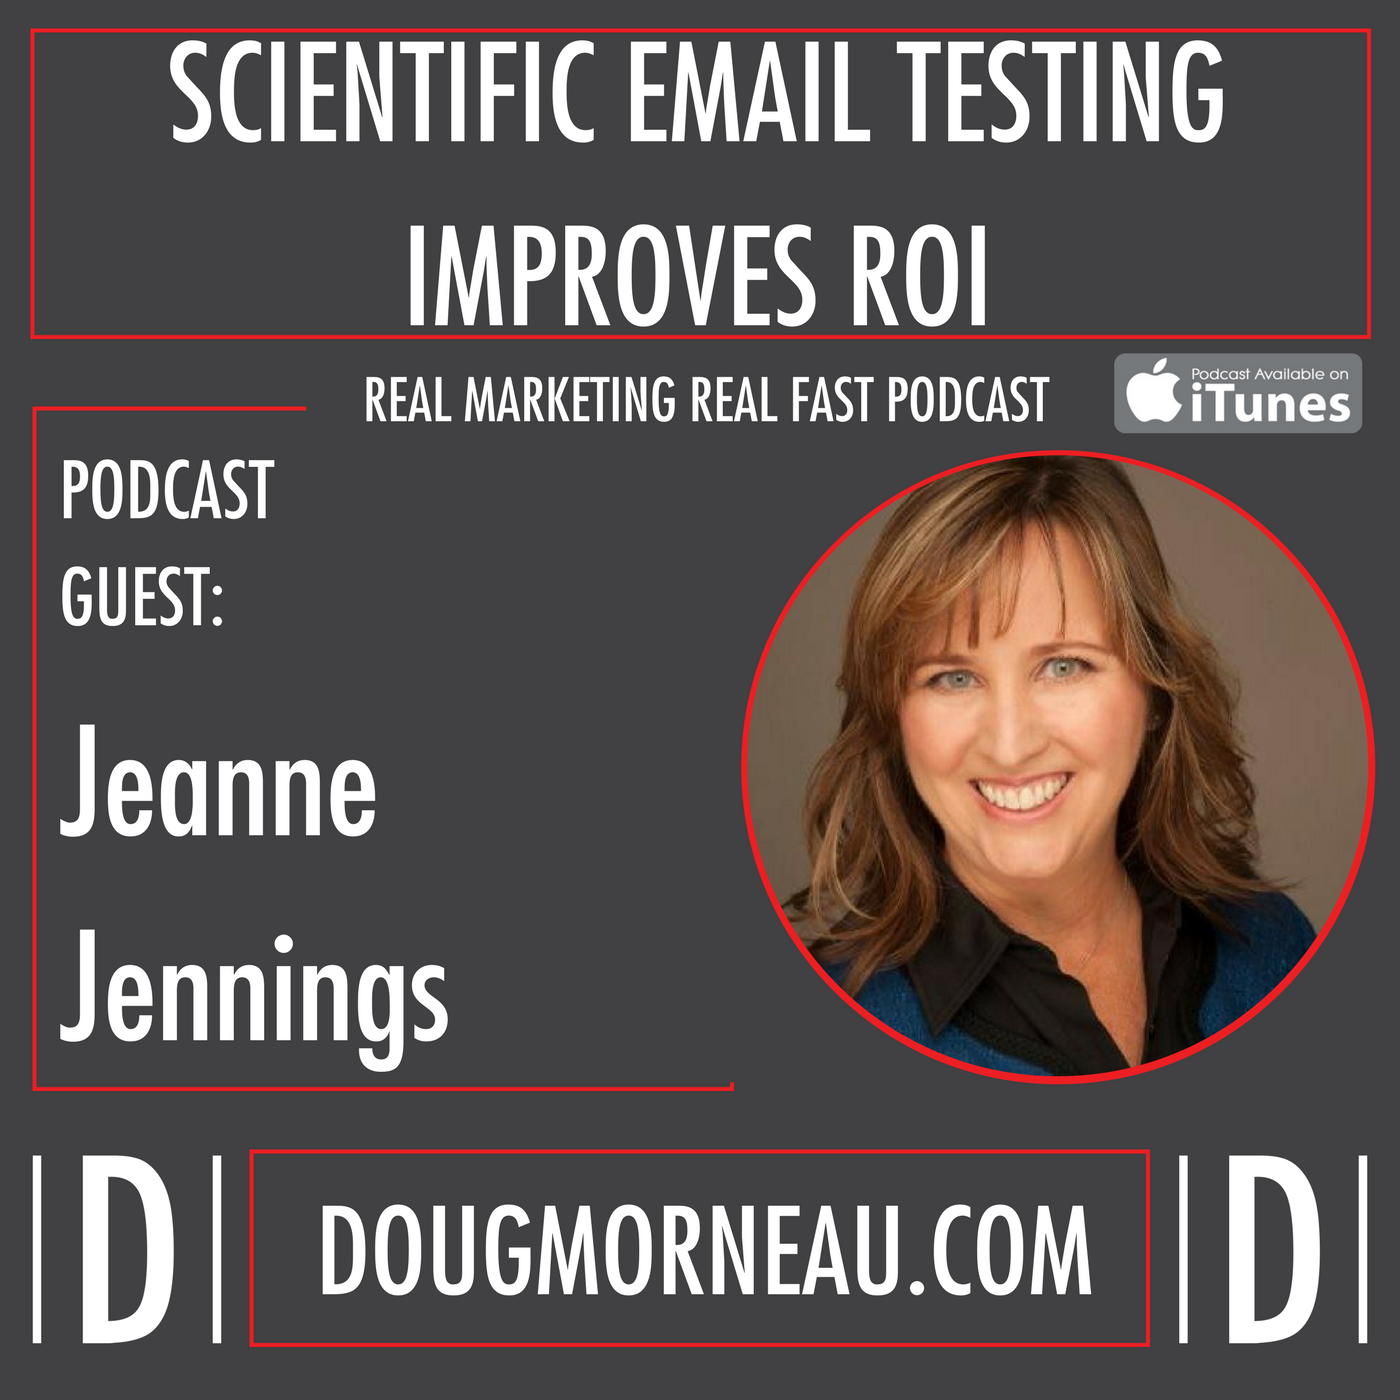 SCIENTIFIC EMAIL TESTING IMPROVES ROI - DOUG MORNEAU - JEANNE JENNINGS - REAL MARKETING REAL FAST PODCAST